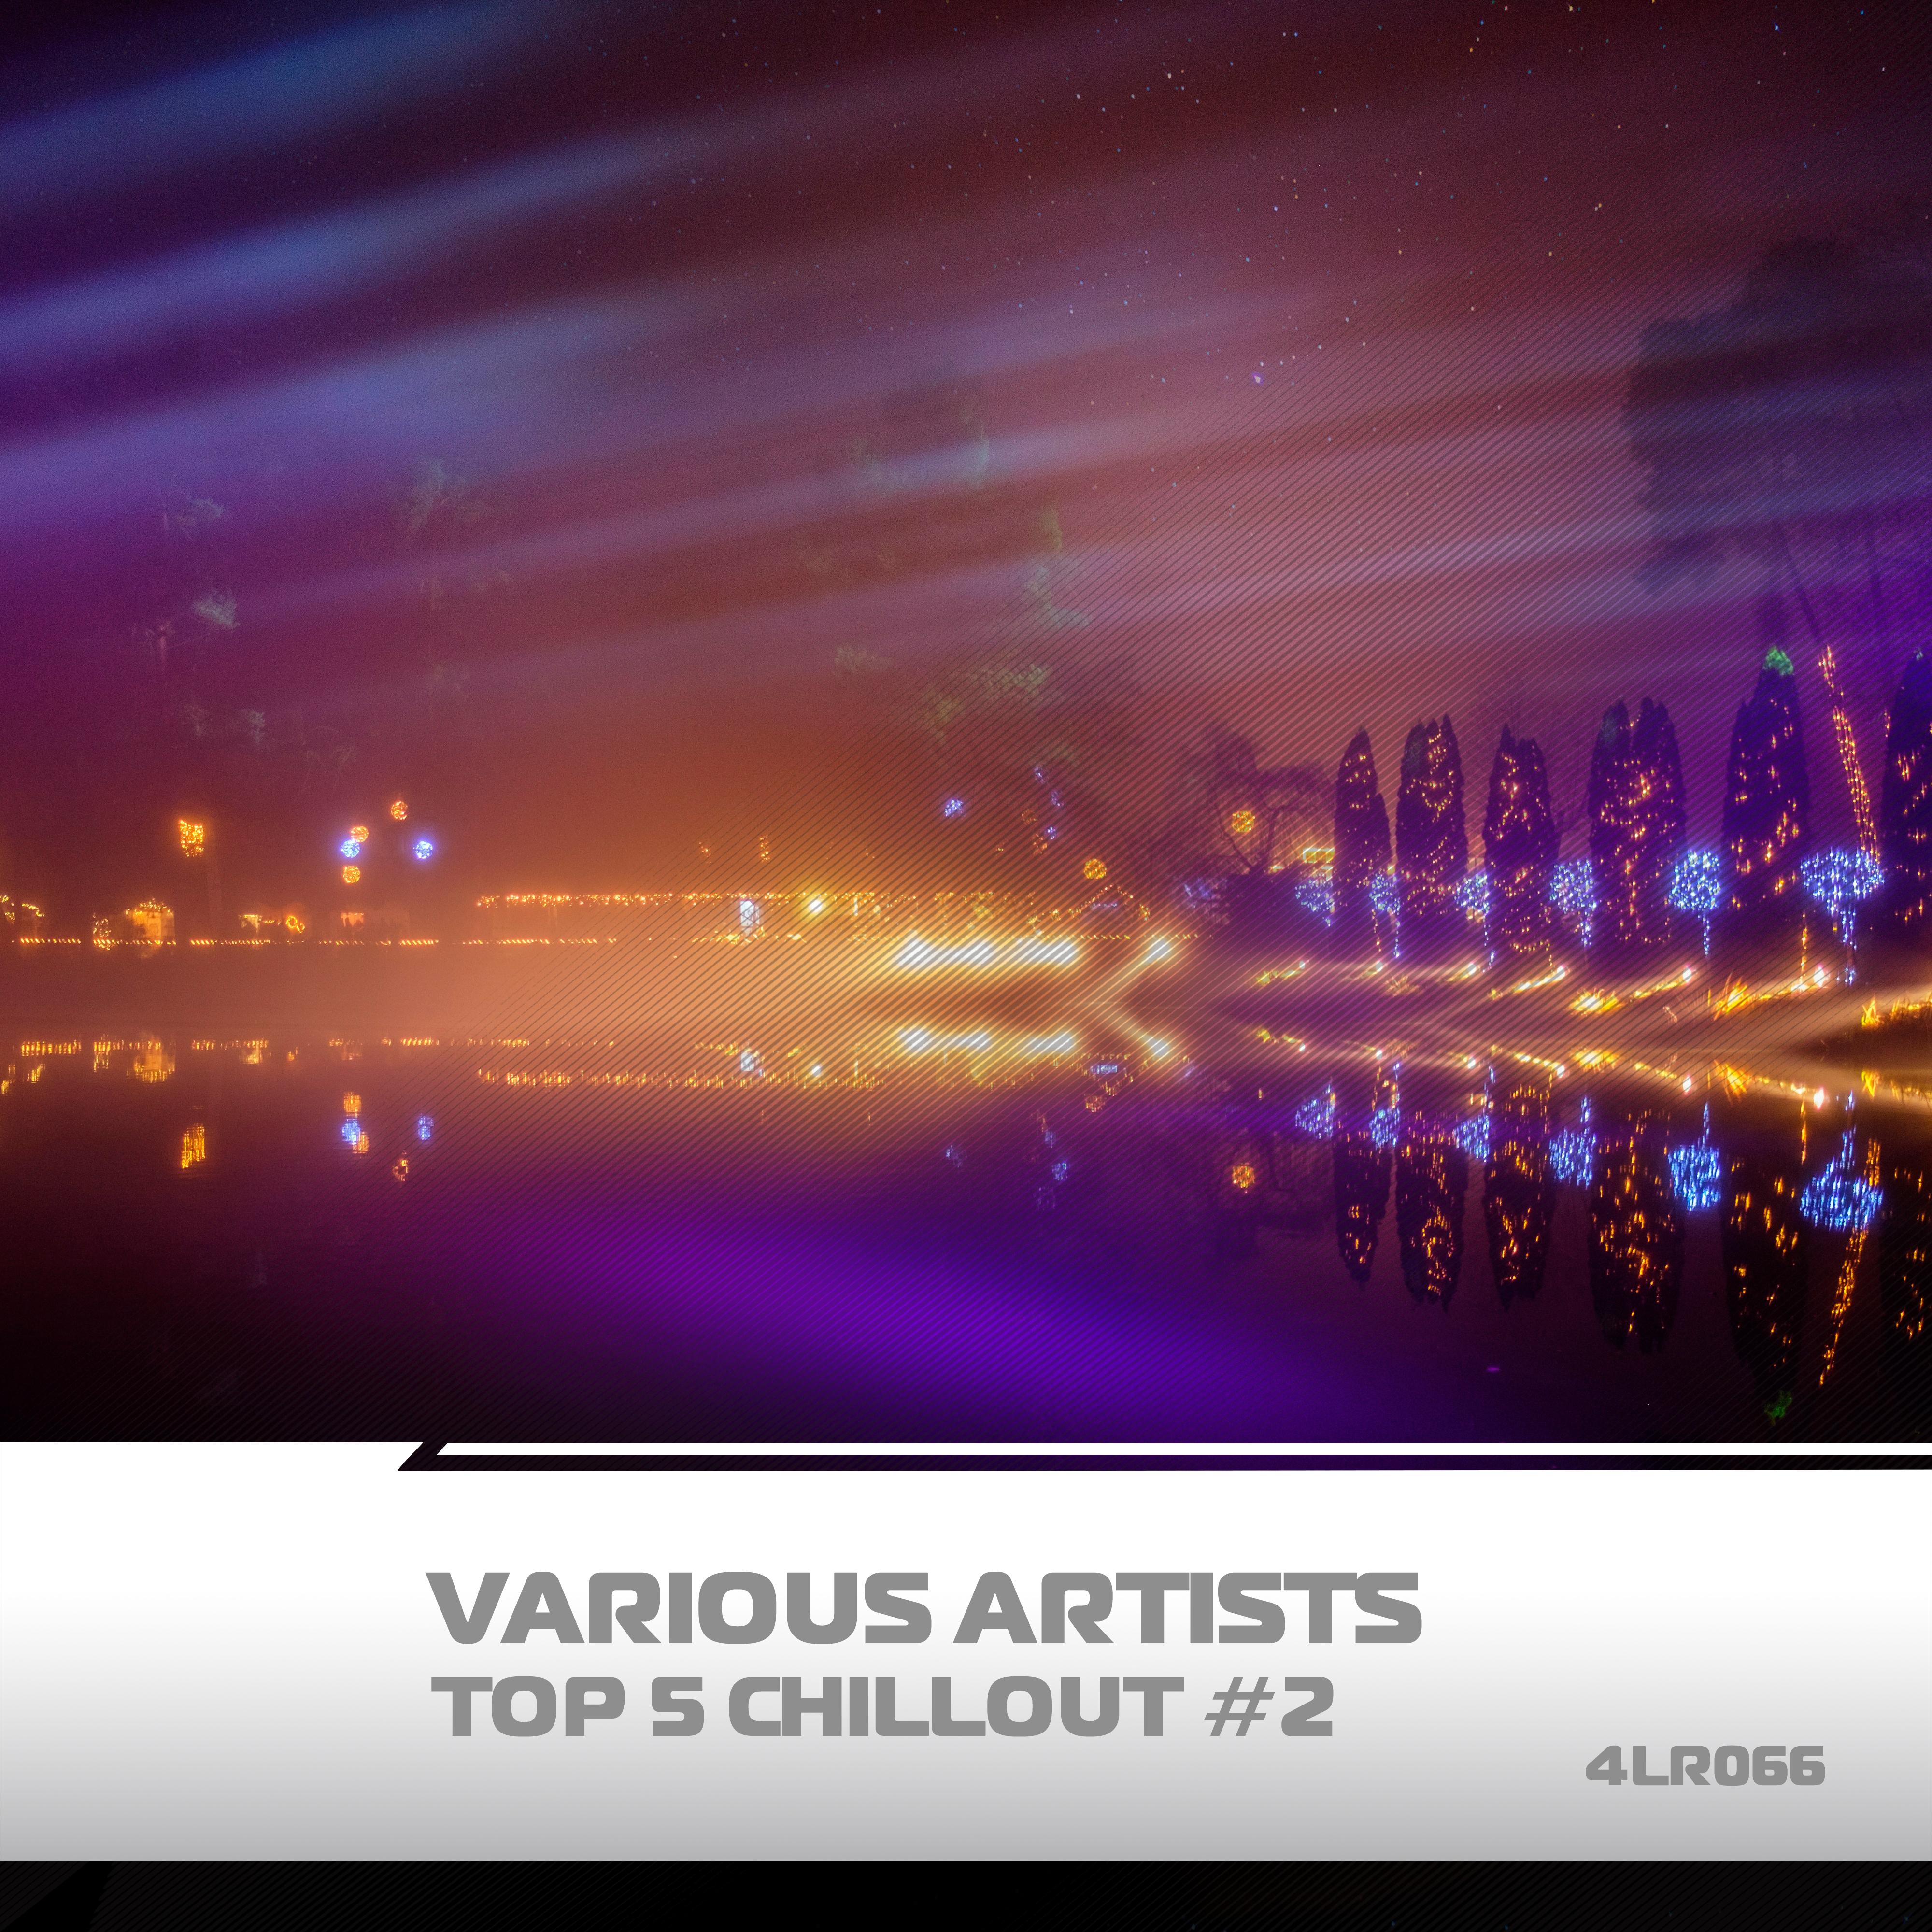 Top 5 Chillout #2